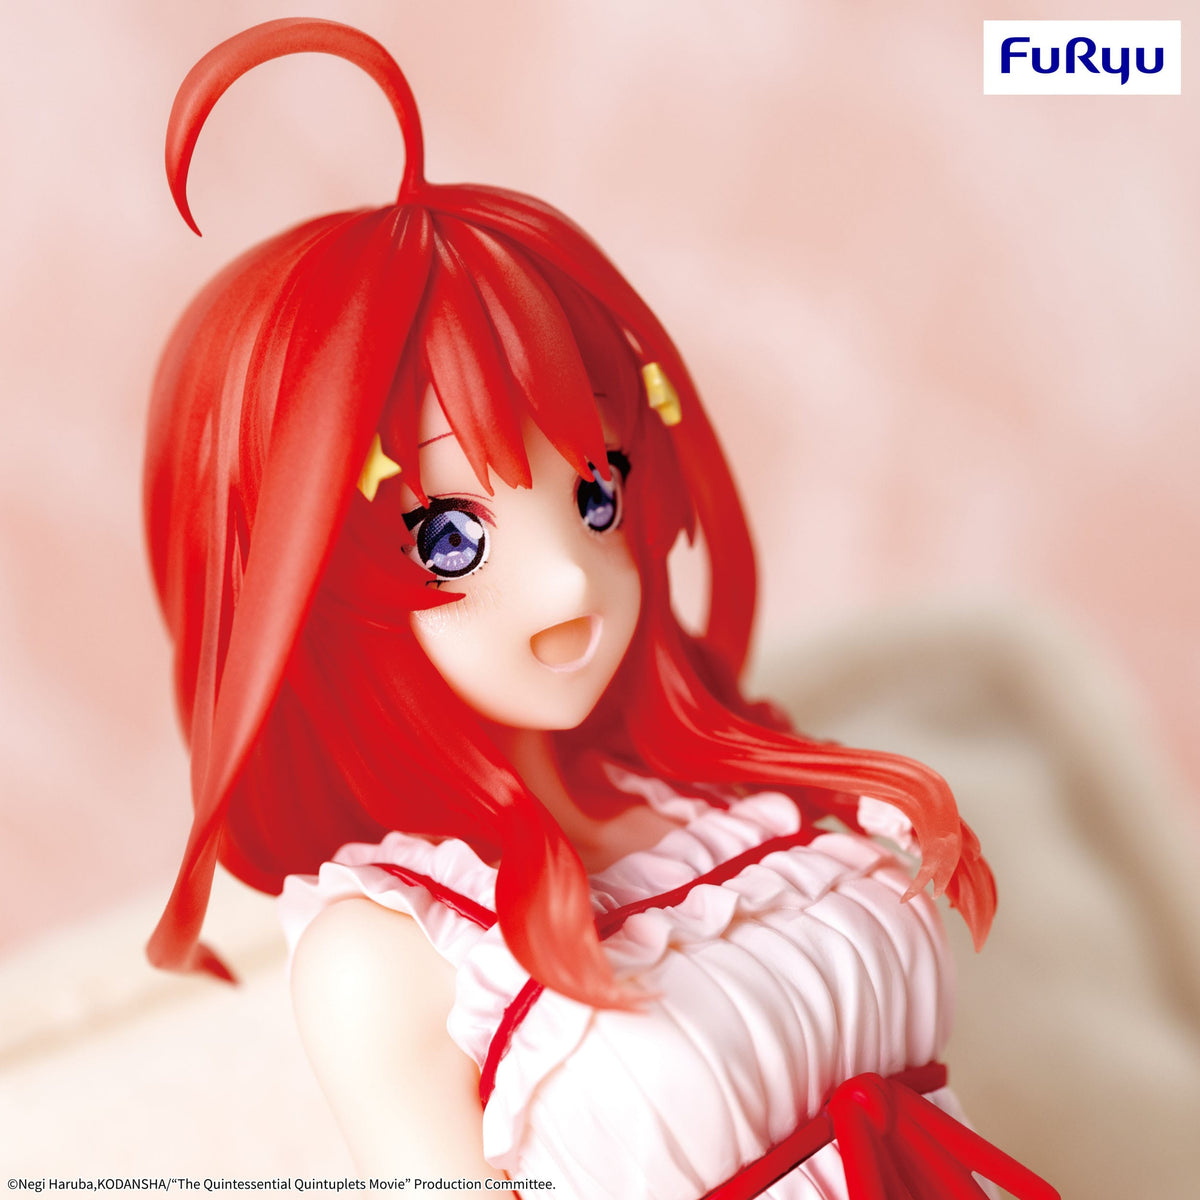 The Quintessential Quintuplets Movie - Itsuki Nakano - Loungewear Ver. Noodle stopper figure (Furyu)